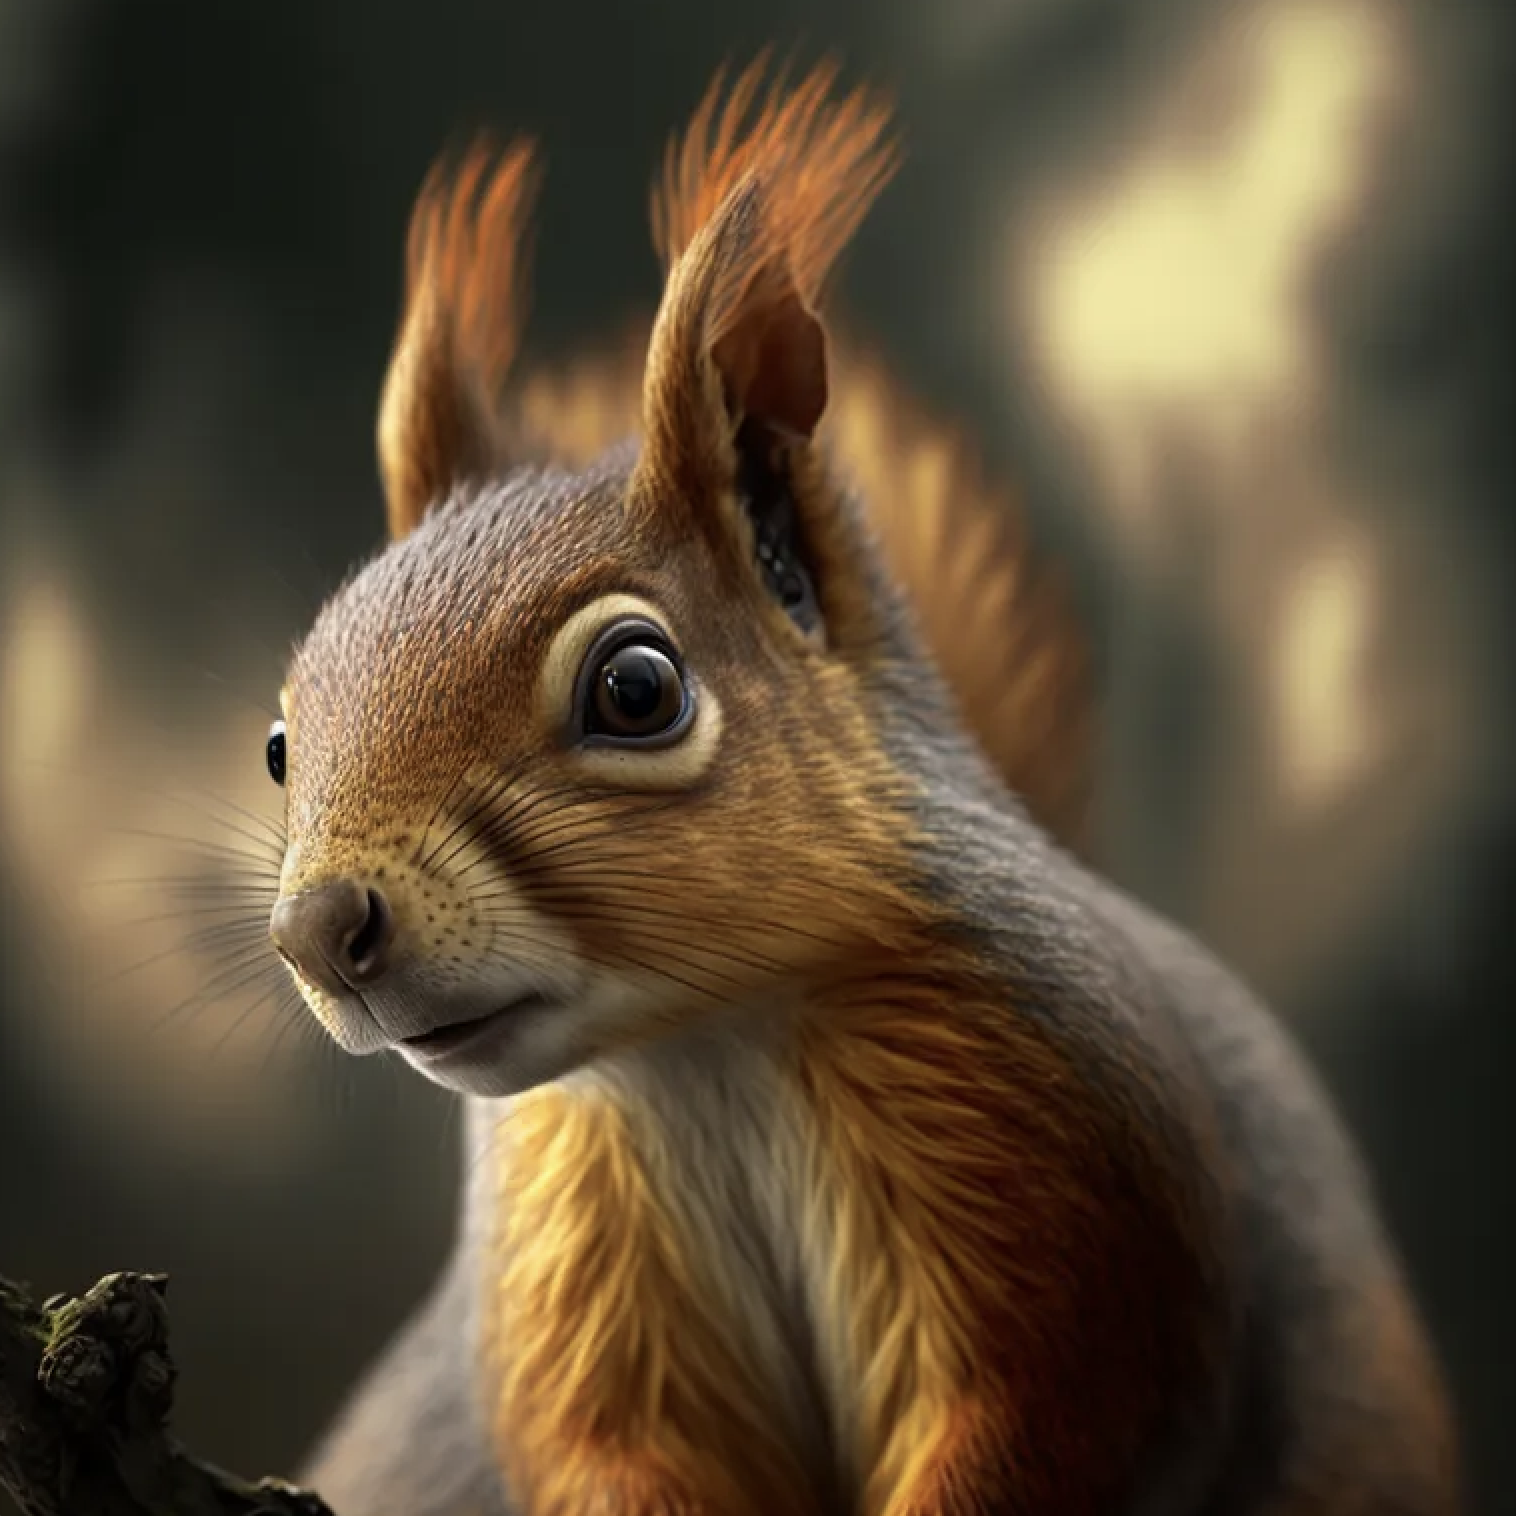 From Acorns to HR: The Tale of Squeaky, the Aspiring Squirrel HR Manager